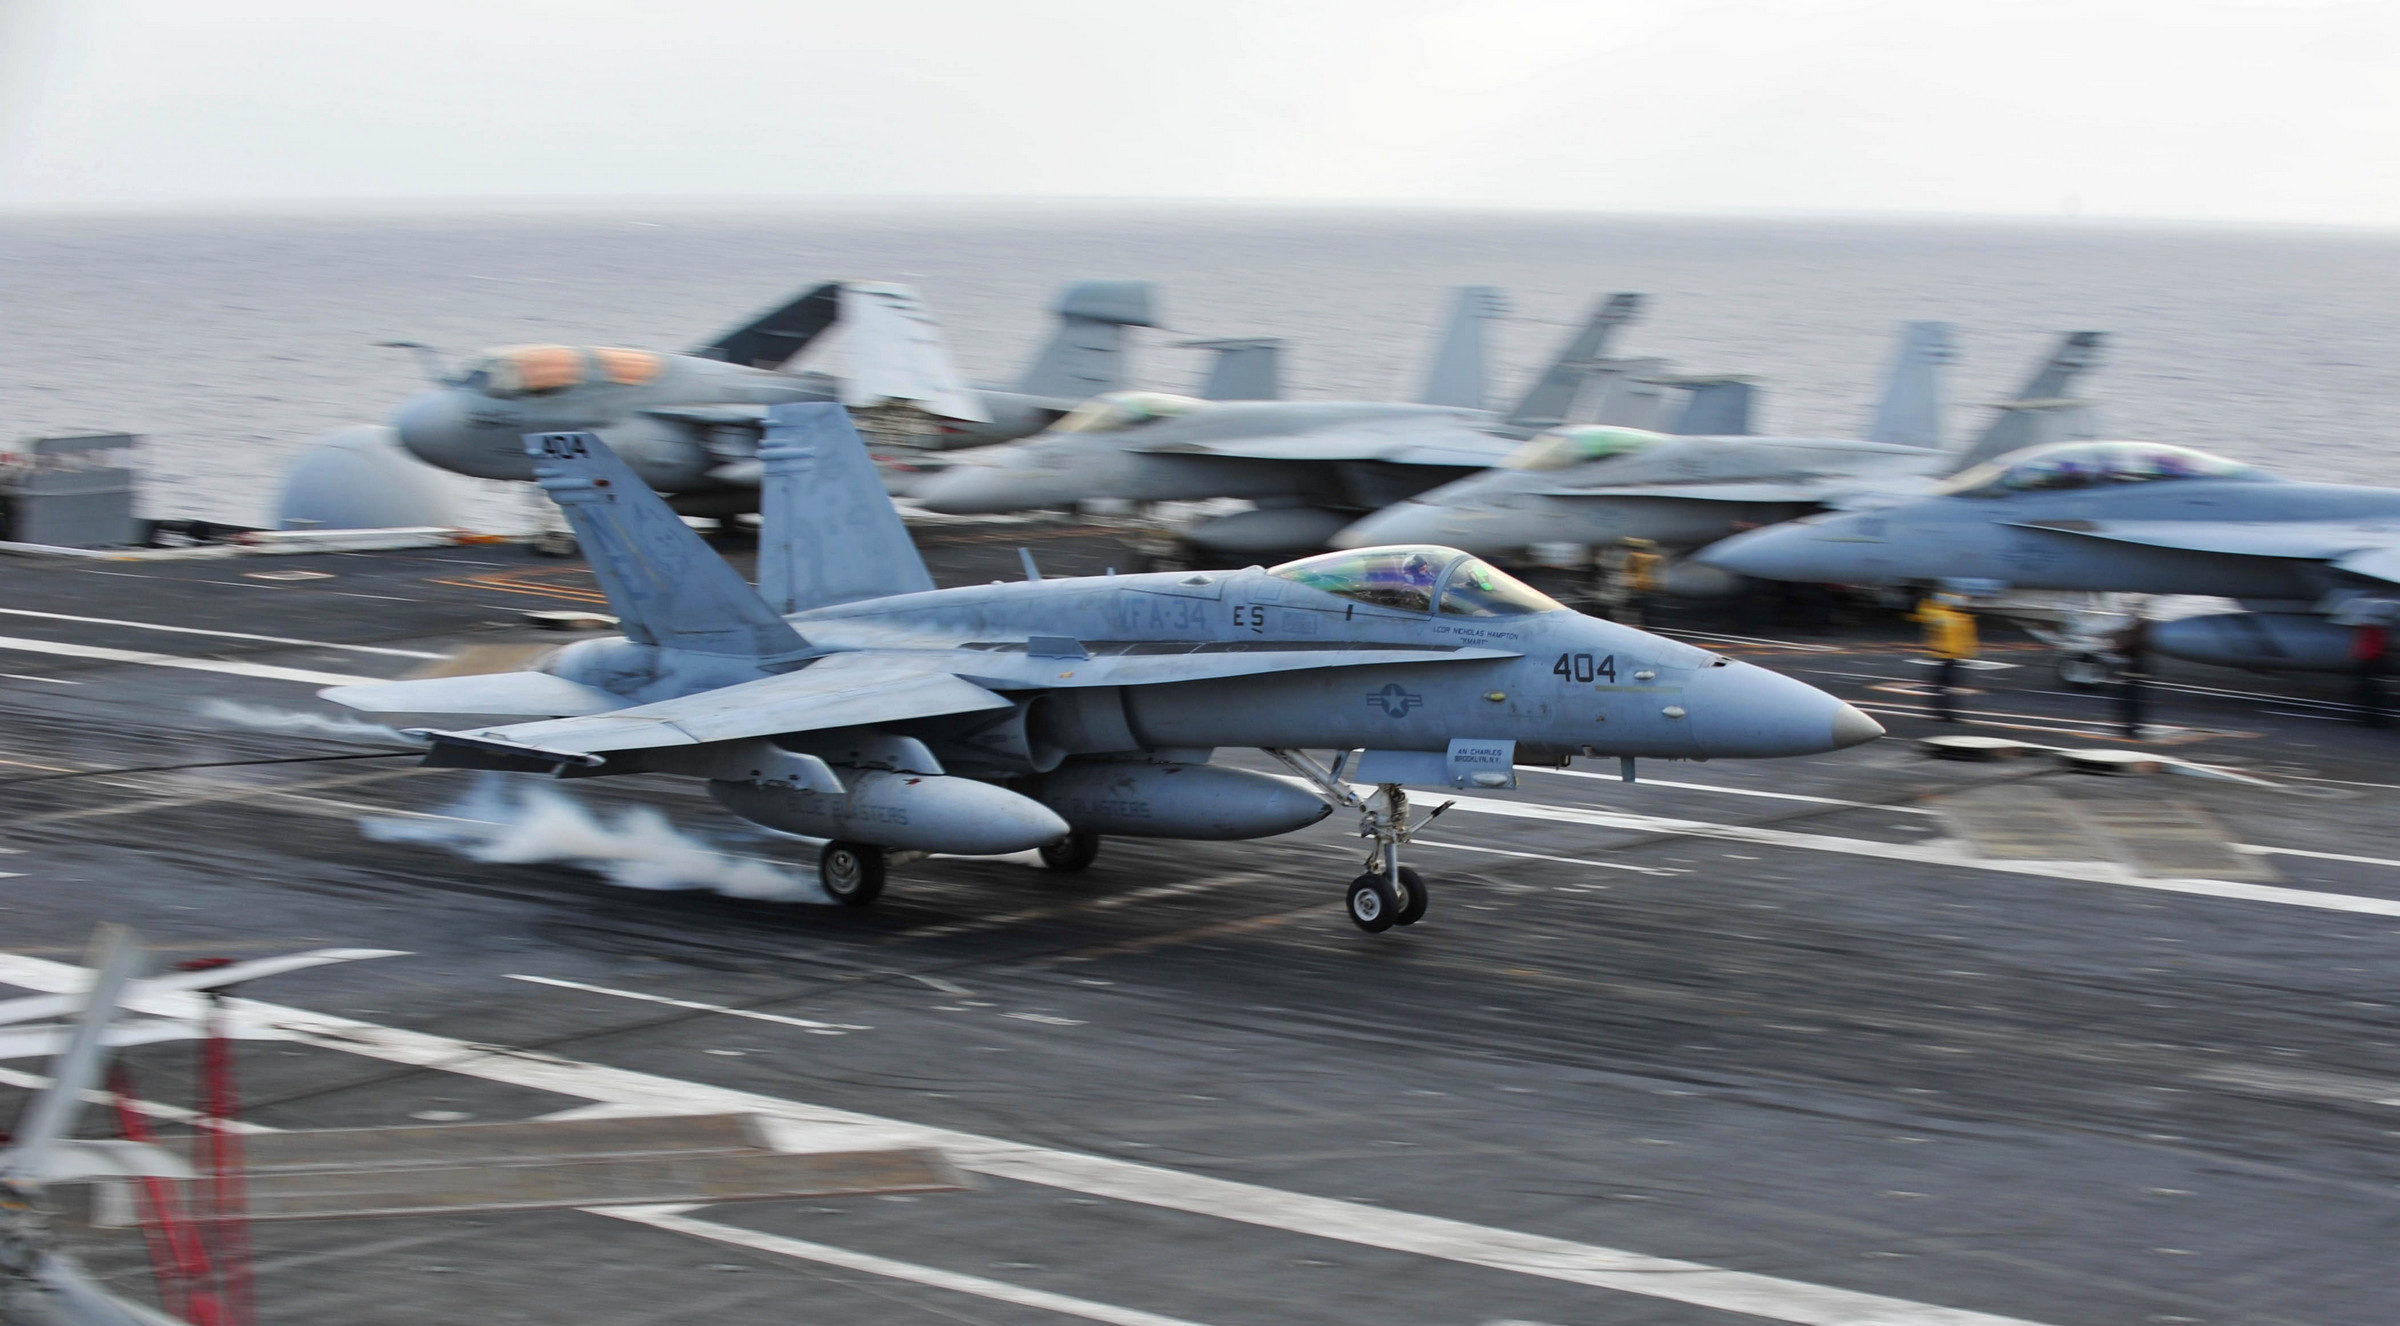 An F/A-18 Hornet assigned to the Blue Blasters of Strike Fighter Squadron (VFA) 34, lands on the flight deck of the aircraft carrier USS Ronald Reagan (CVN 76). Ronald Reagan and the embarked Carrier Air Wing (CVW) 2 are underway conducting carrier qualifications. (U.S. Navy photo by Mass Communication Specialist 3rd Class Charles D. Gaddis IV/Released)